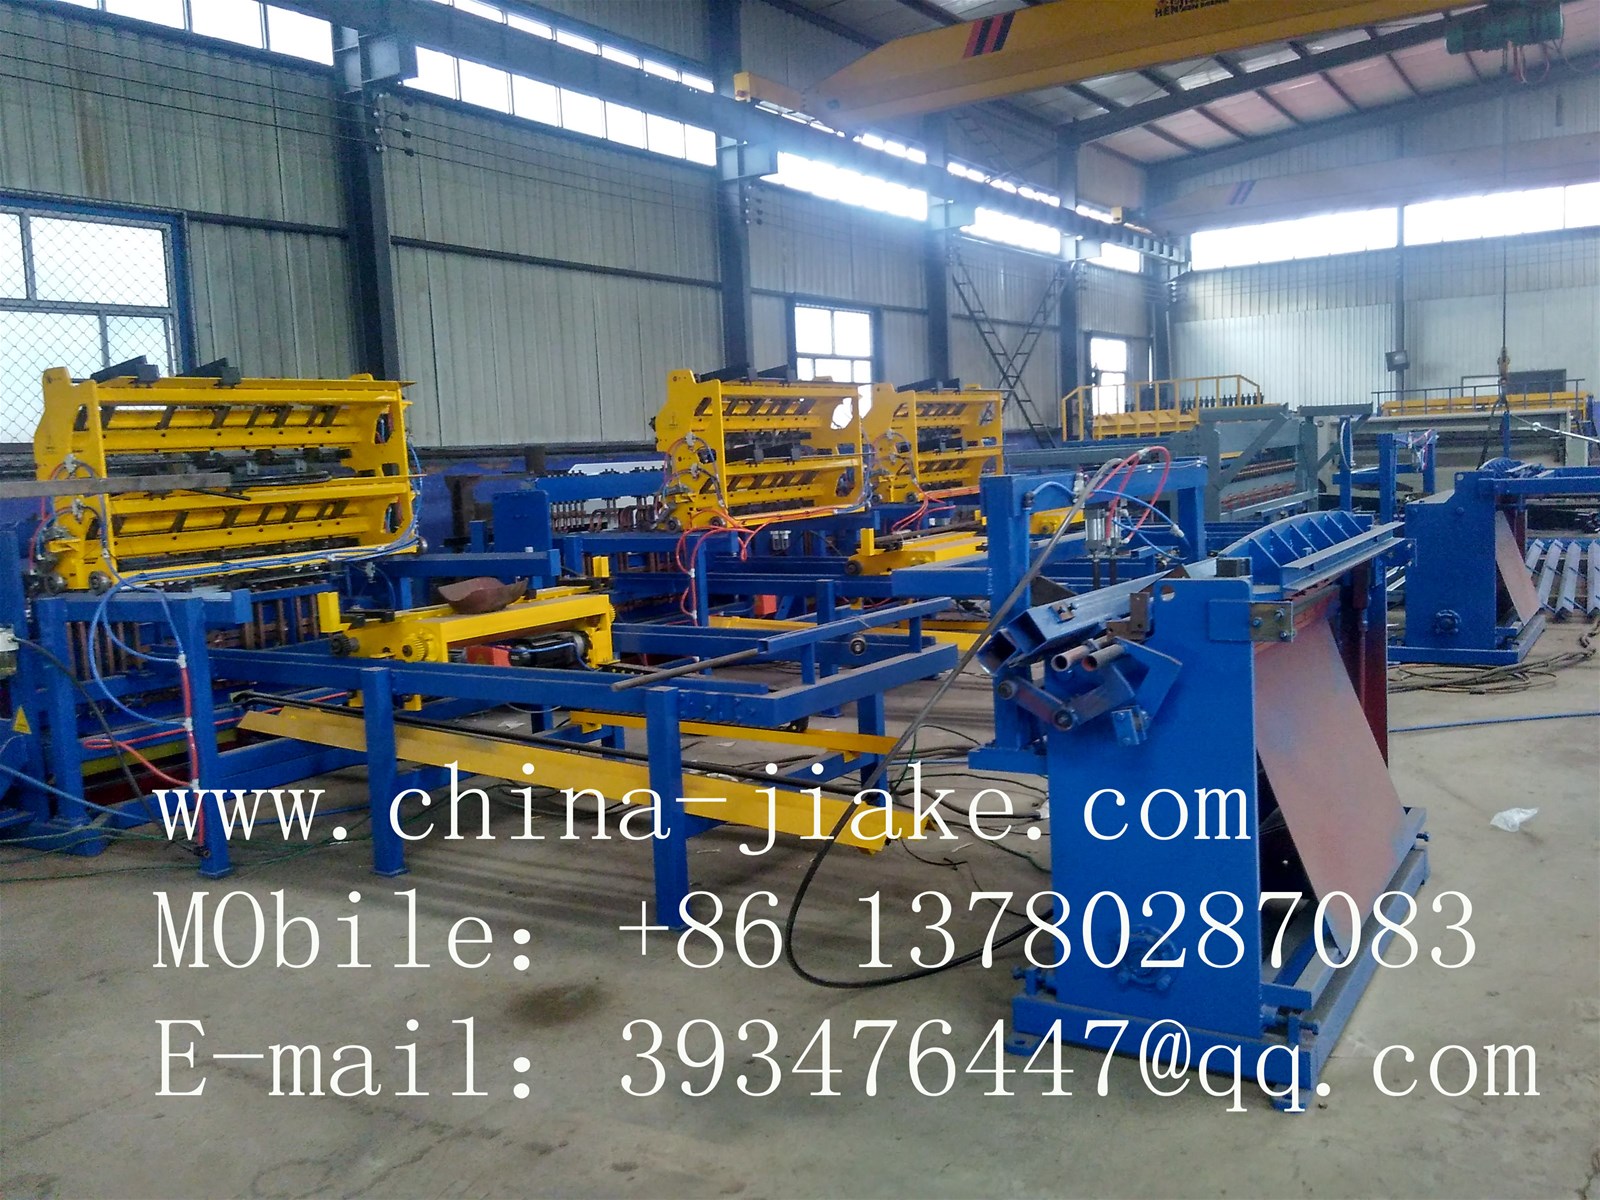 Full Automatic Wire Mesh Welding Machines for making Poultry Chicken Cage MeshJKAC1200S